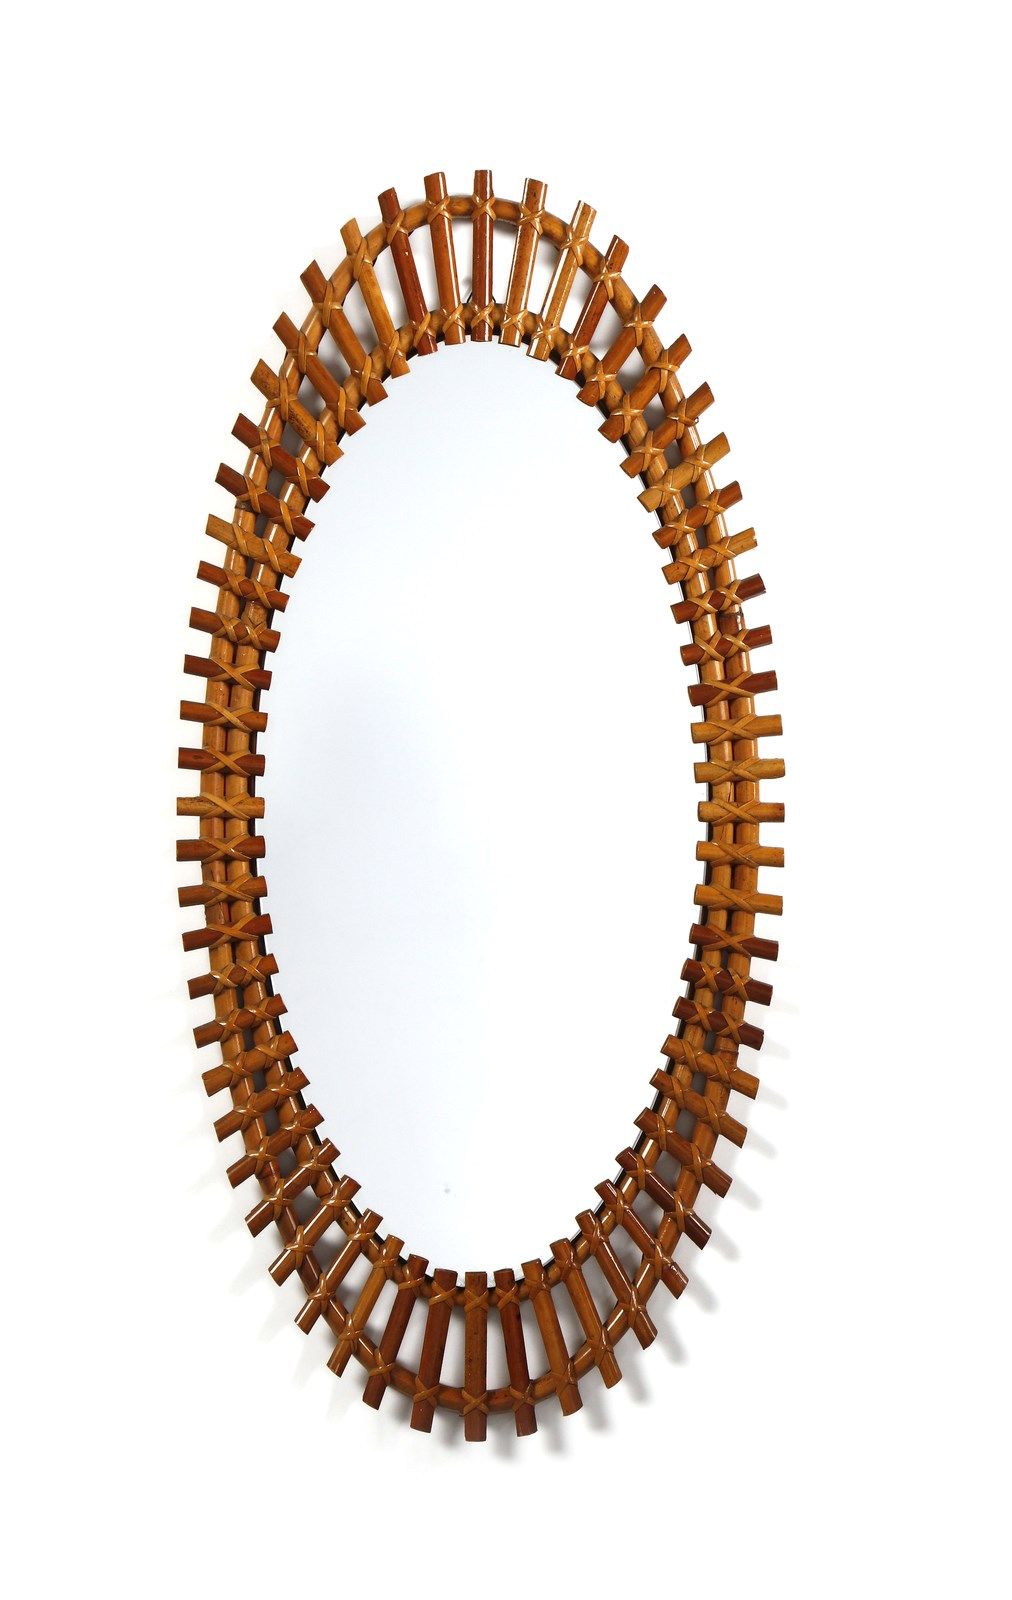 Manifattura Italiana MANIFATTURA ITALIANA Mirror. Bamboo and mirror. Cm 50,00 x &hellip;